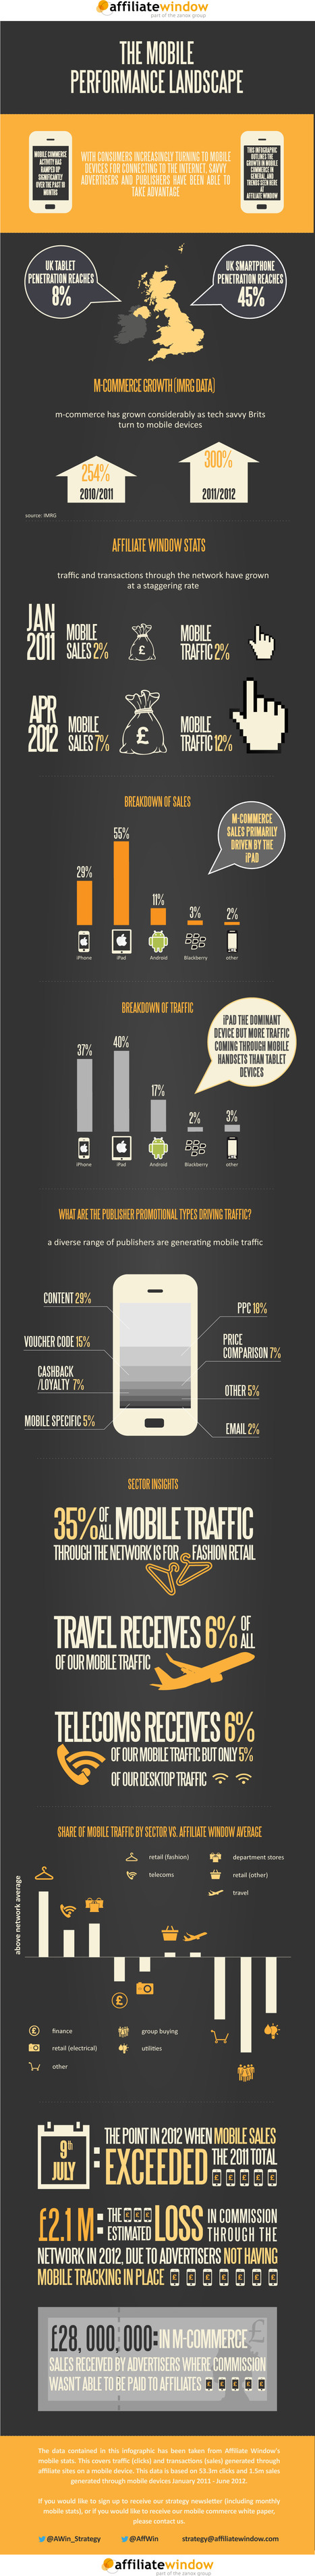 MCommerce Is All About The Pad [infographic] | Digital Collaboration and the 21st C. | Scoop.it